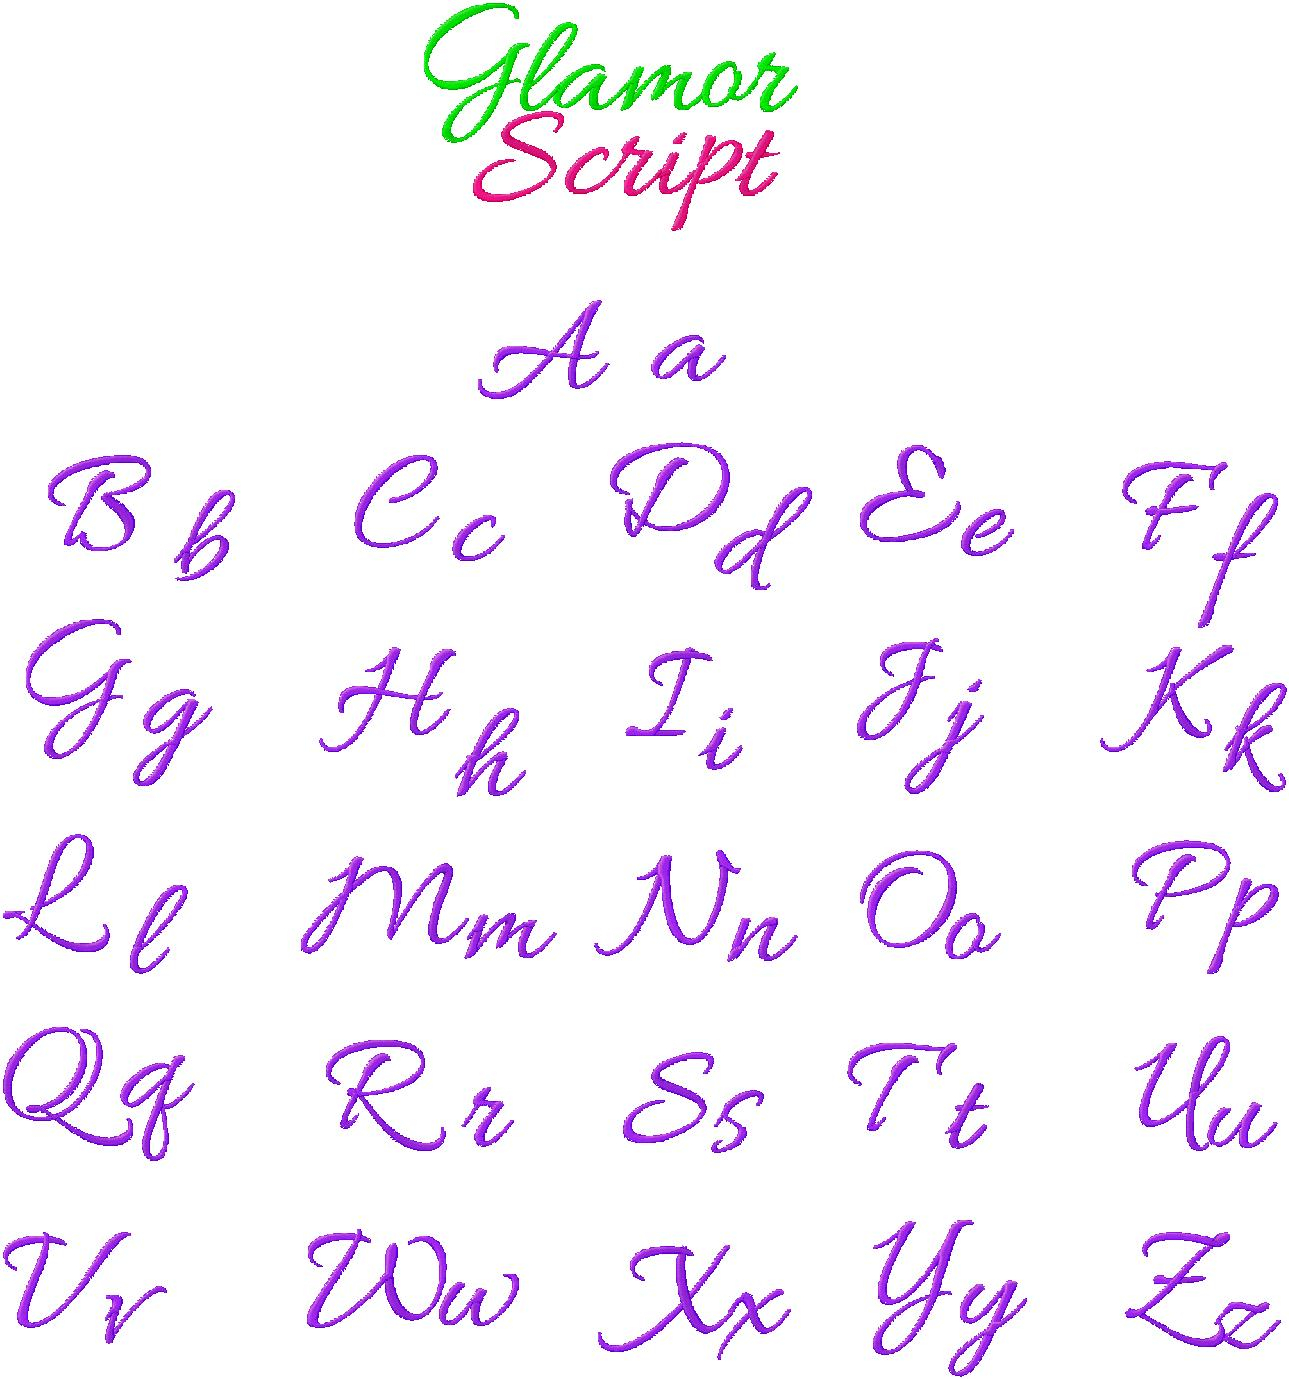 Free Embroidery Alphabet Patterns 12 Free Embroidery Font Designs Images Free Machine Embroidery